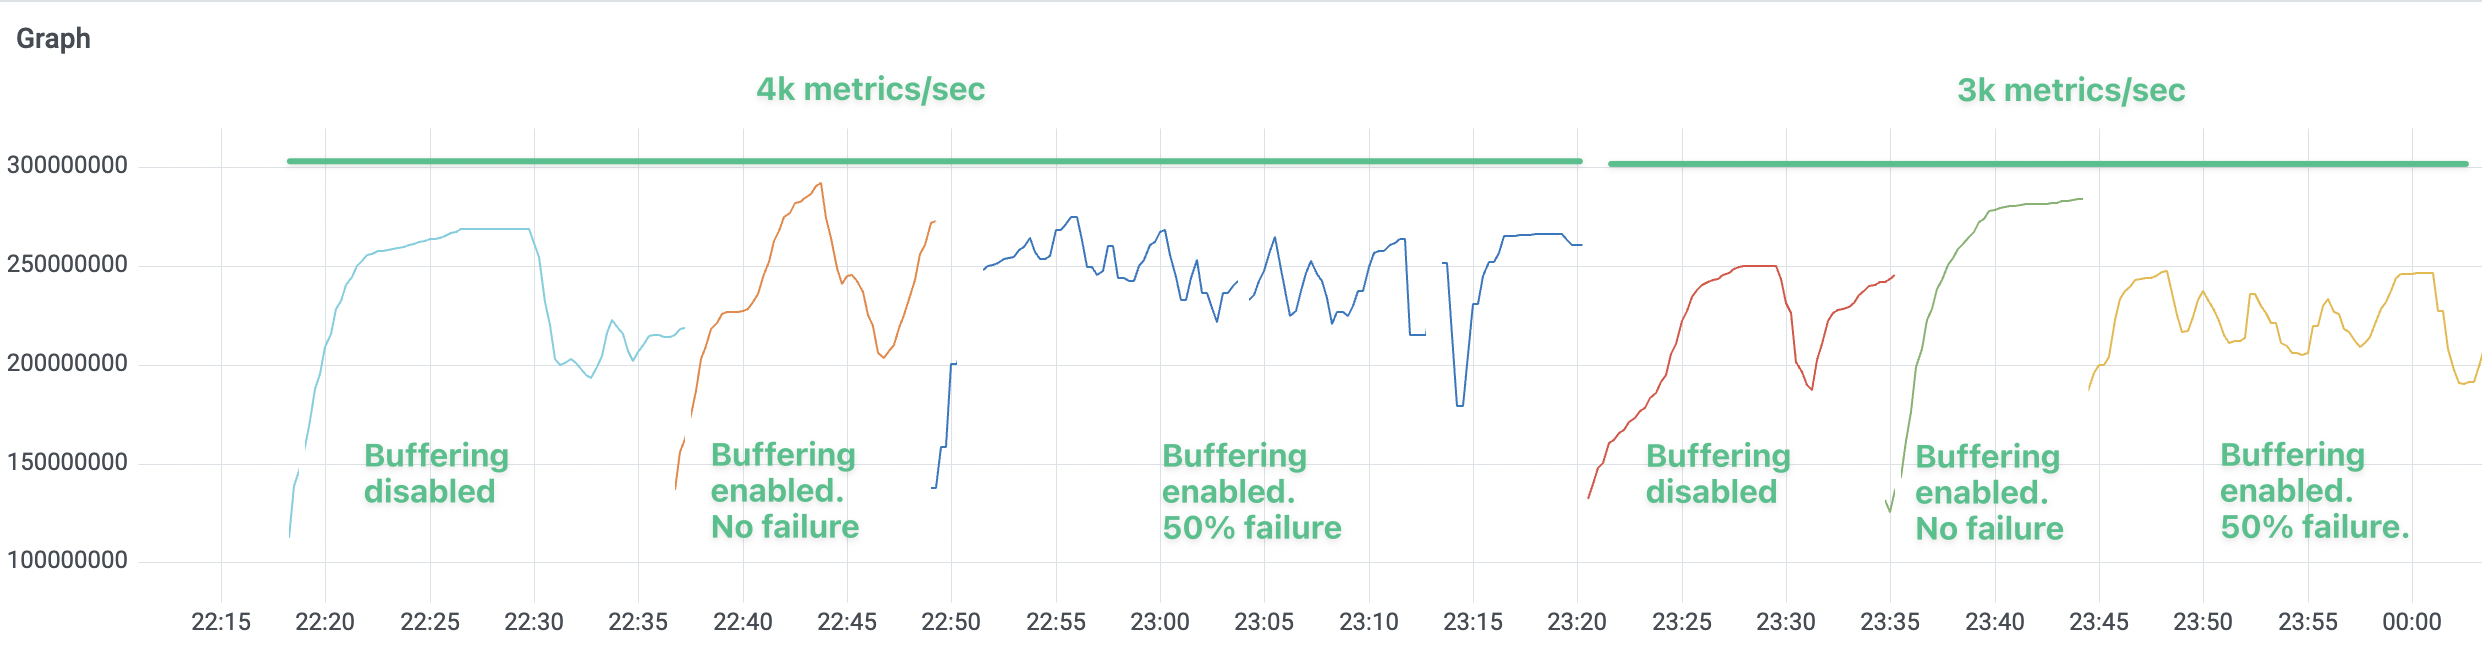 Graph showing effect of buffering on memory usage